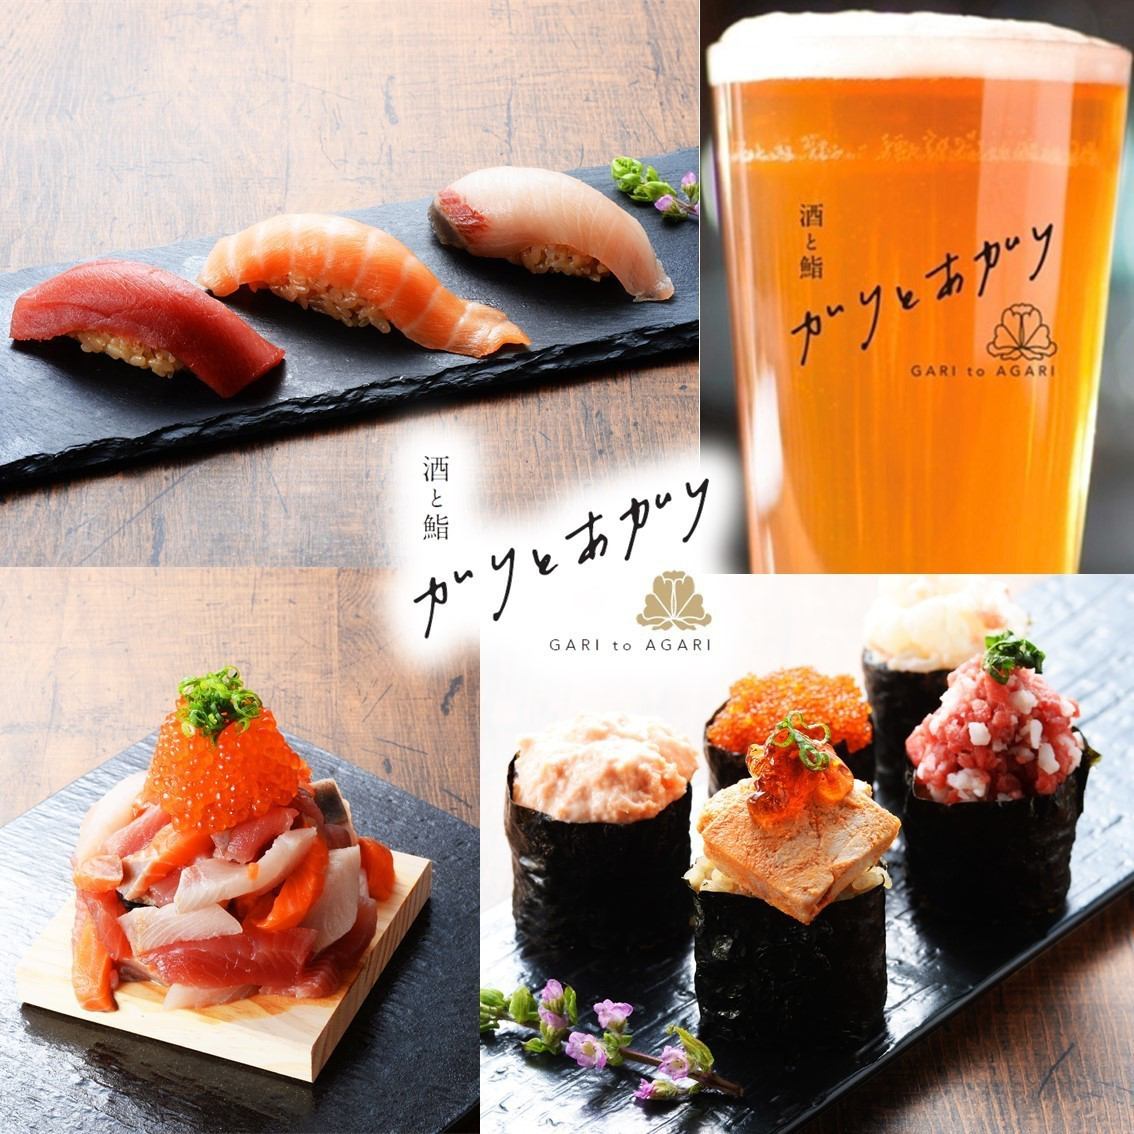 Make delicious sushi more "casual" and "easy".NEO Sushi Izakaya that made it happen